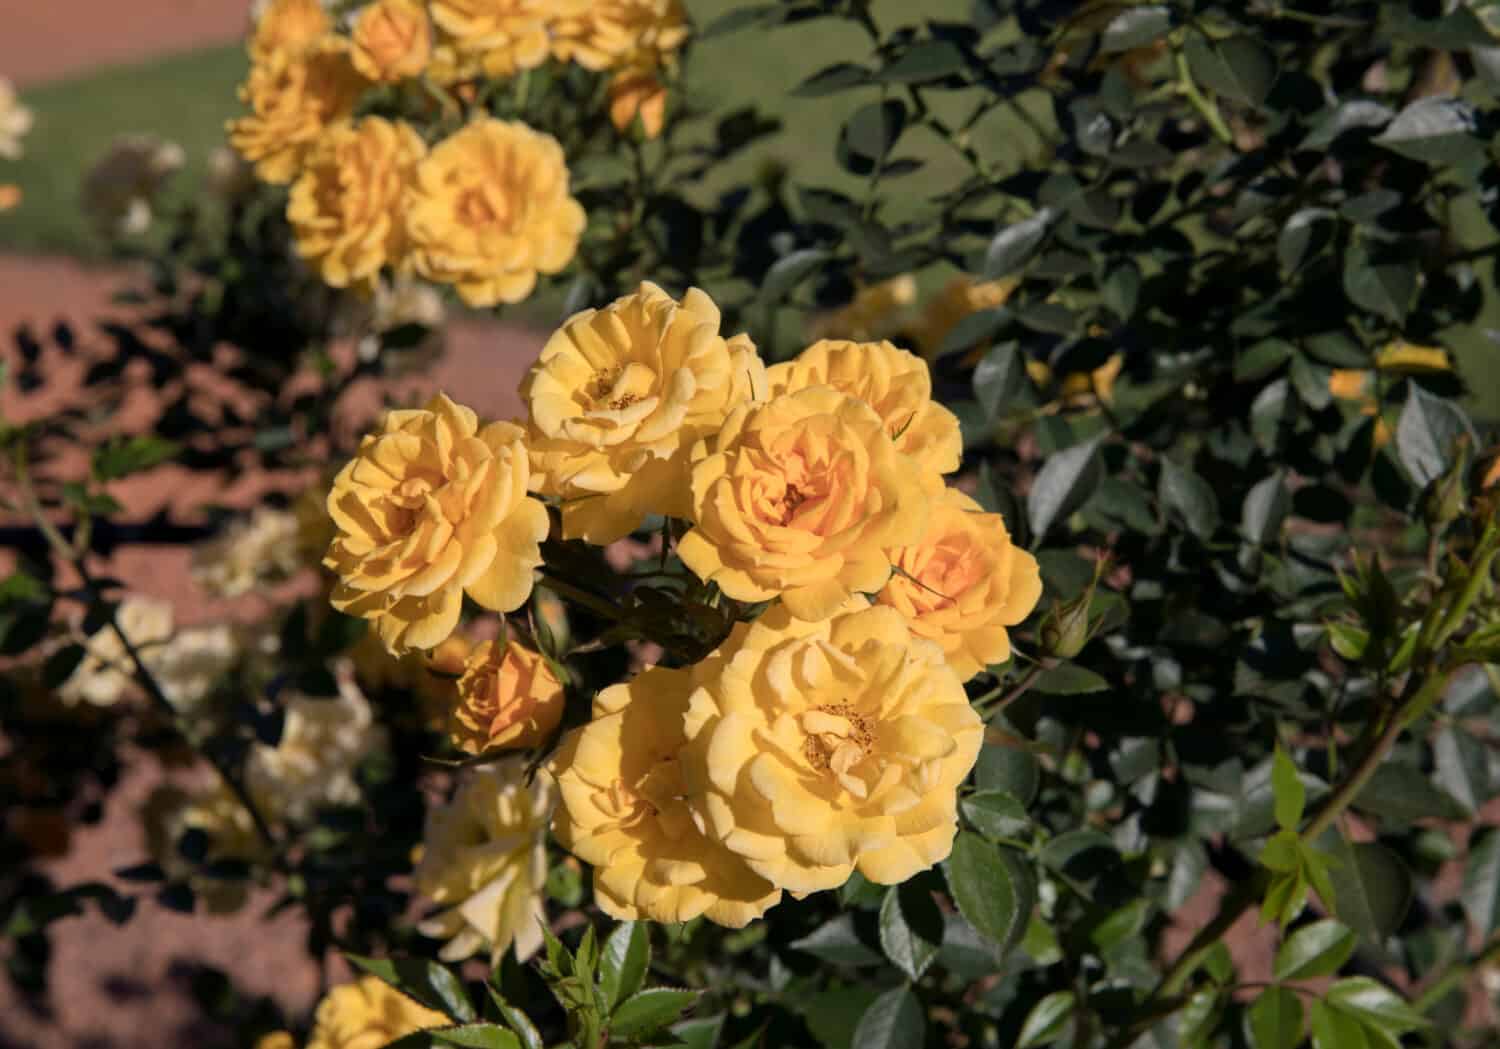 Roses spring blooming in the park. Beautiful Gold Medal Rose with flower clusters of intense yellow petals and iron staking, blooming in the garden.